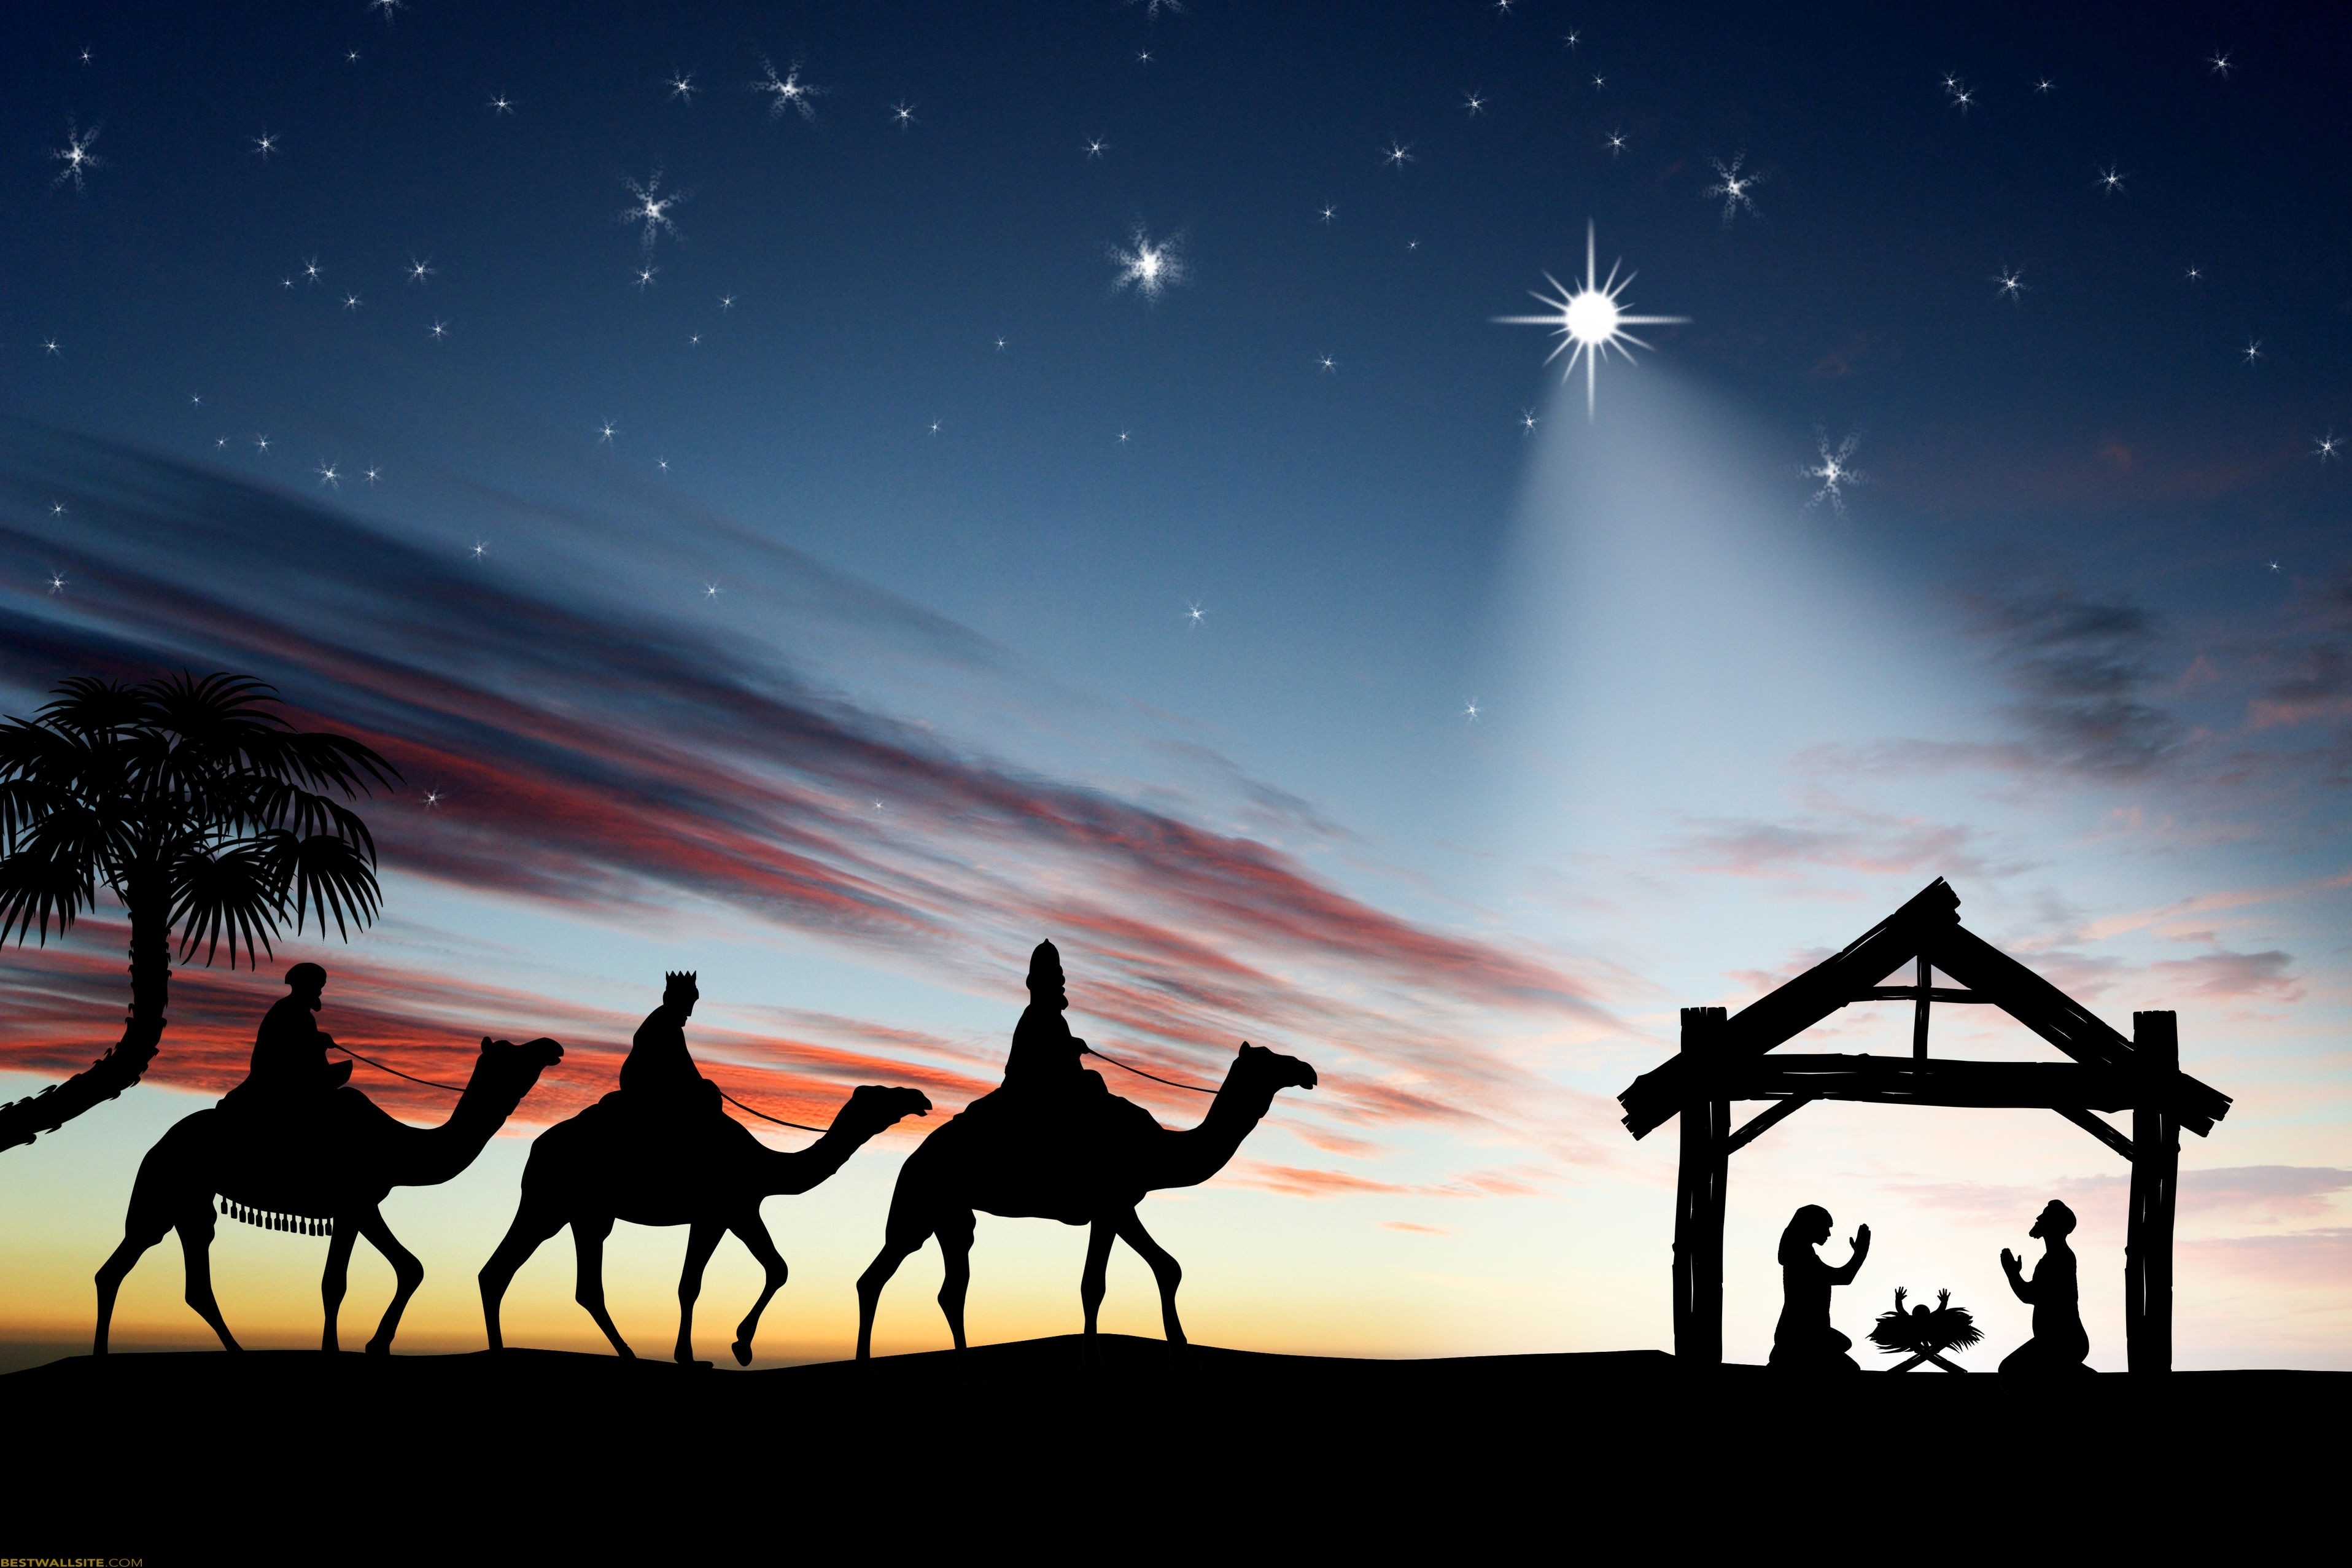 10 Top Christmas Nativity Background Images Full Hd 1080p For Pc ...